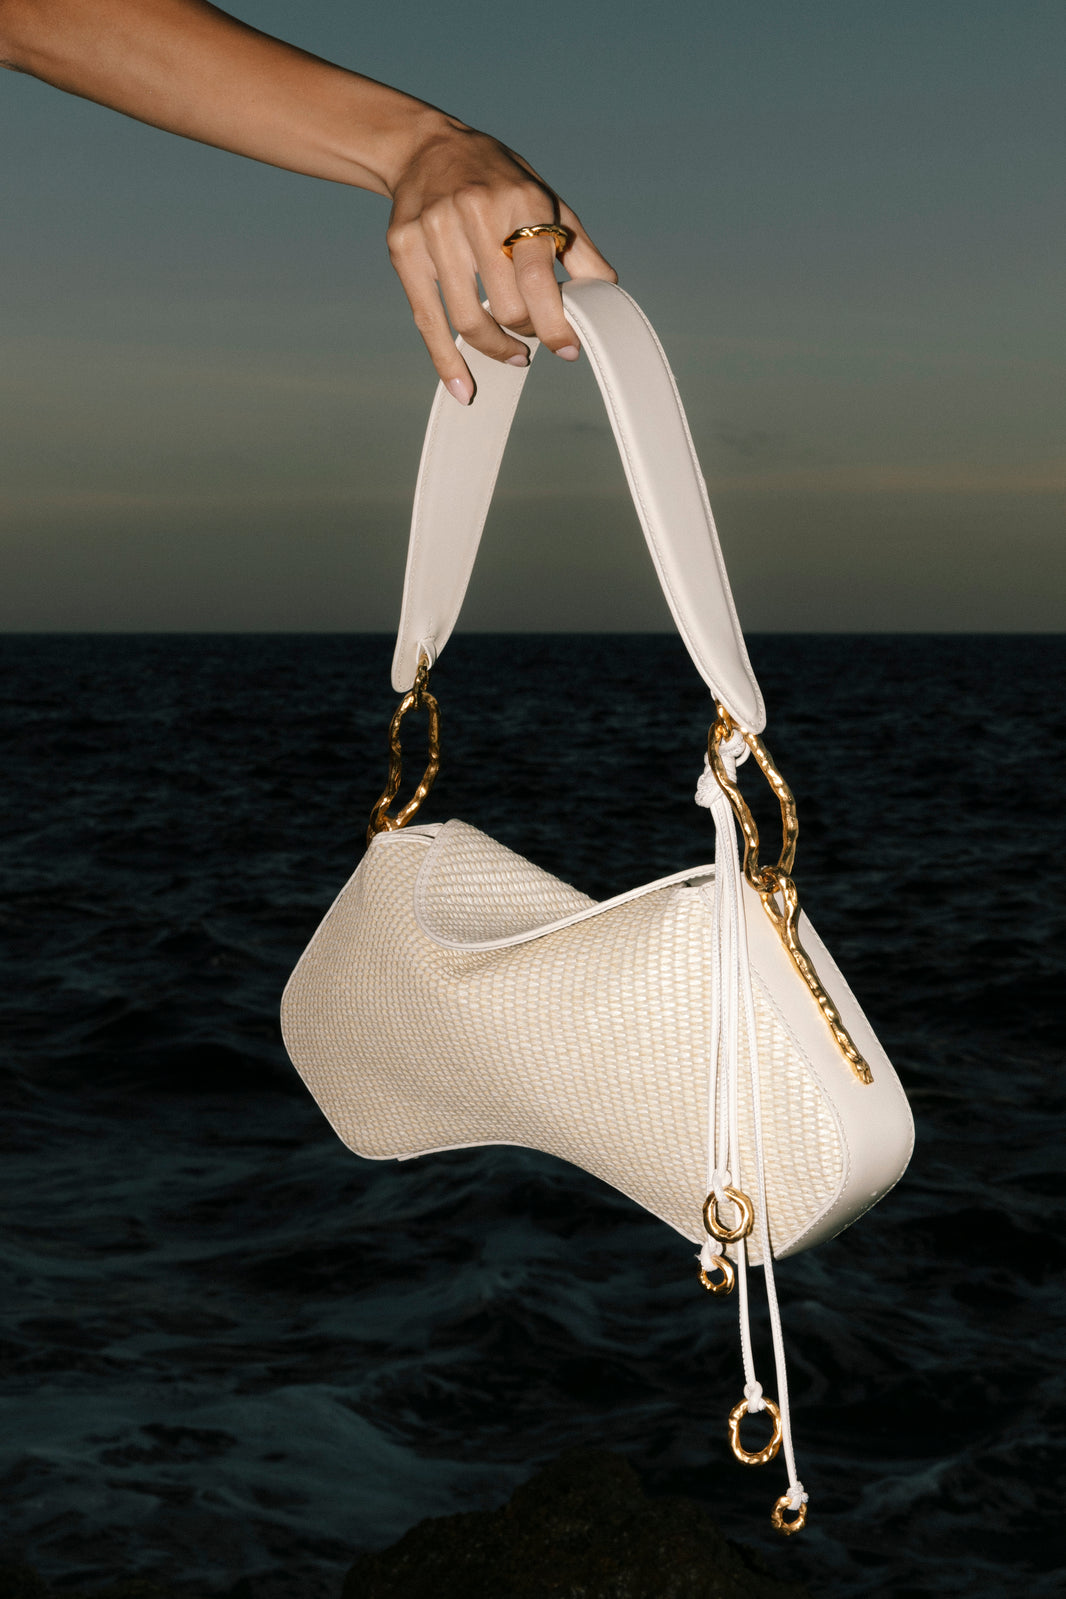  Deià handmade in Woven Natural Raffia and Nappa Leather Trim senderkis cream side view